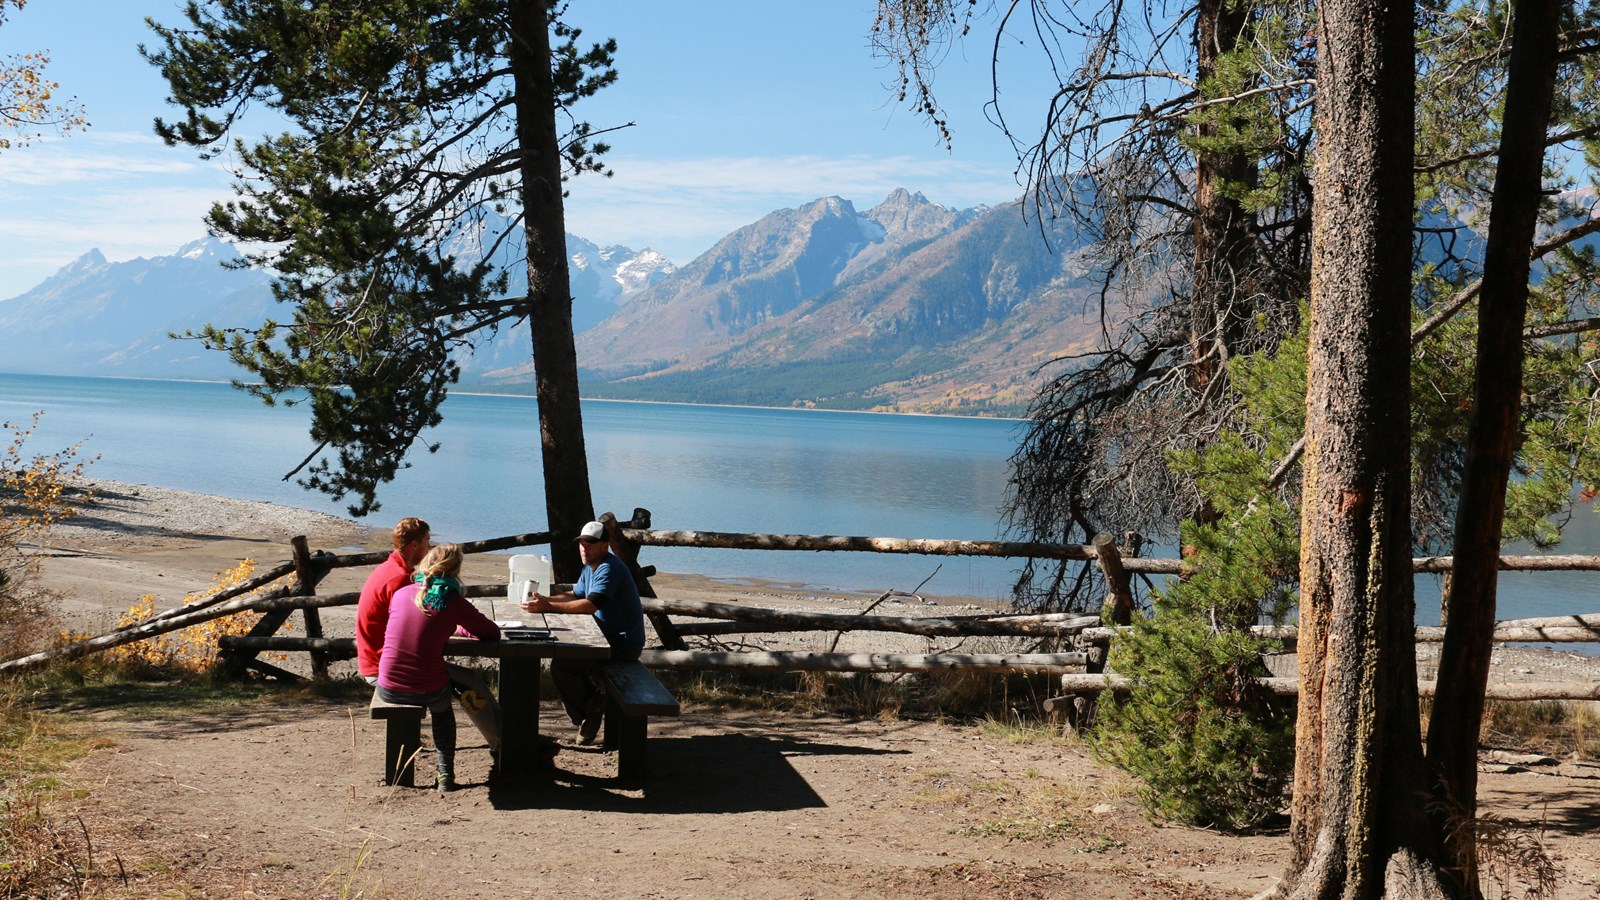 Visitors at picnic area under trees with Jackson Lake and the Teton Range in the distance